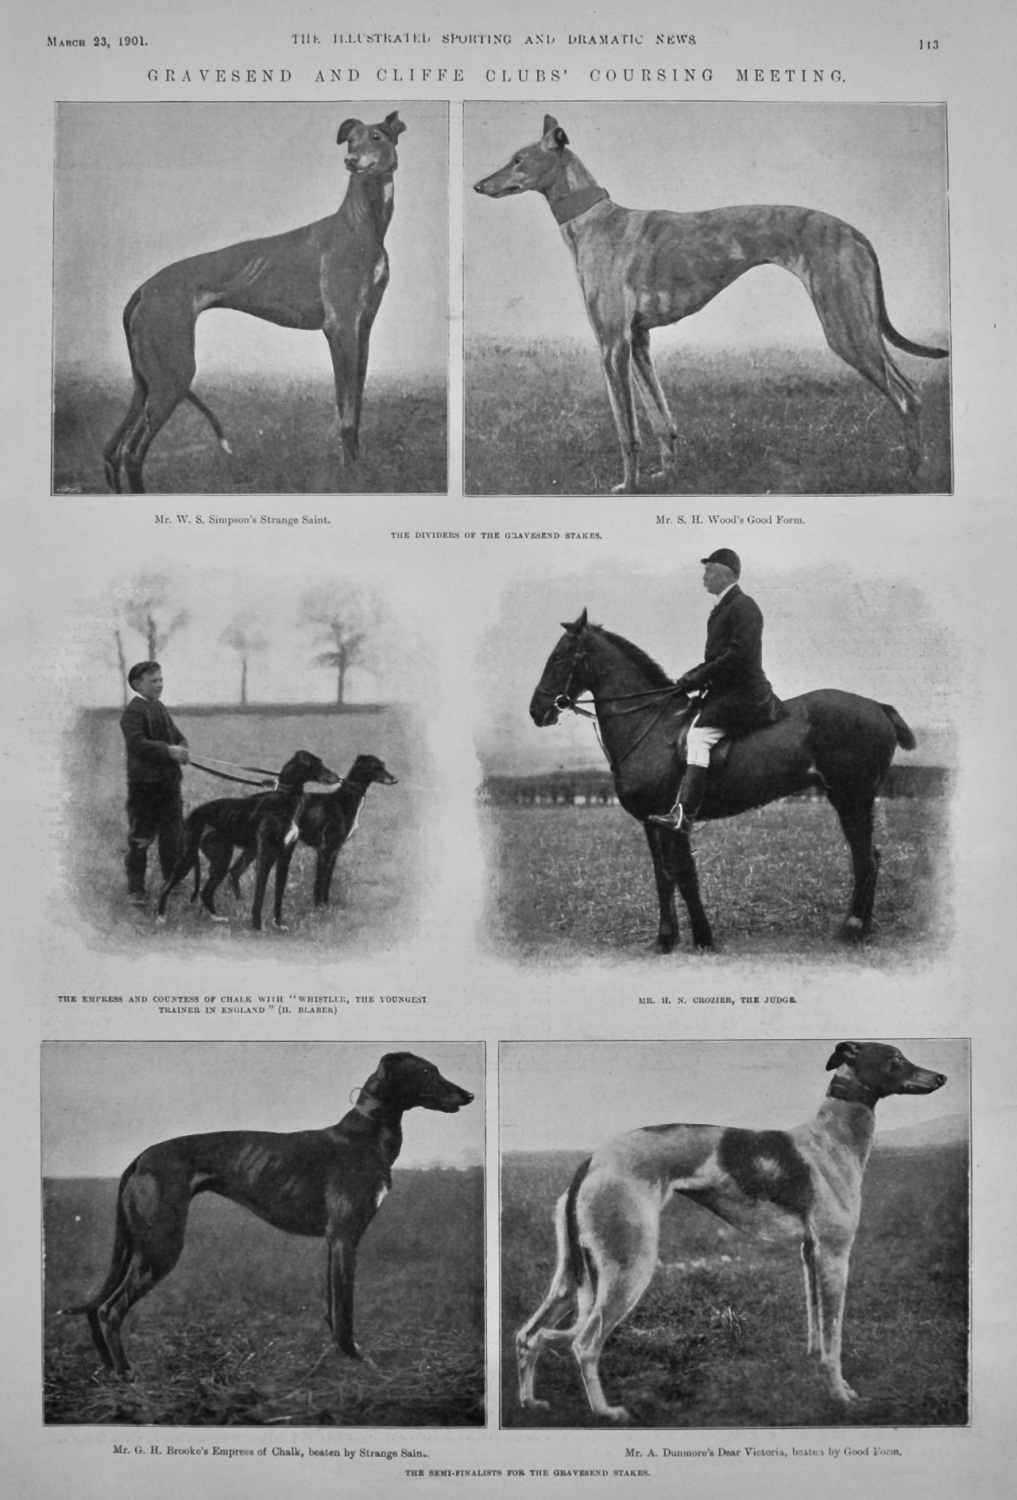 Gravesend and Cliffe Clubs' Coursing Meeting.  1901.